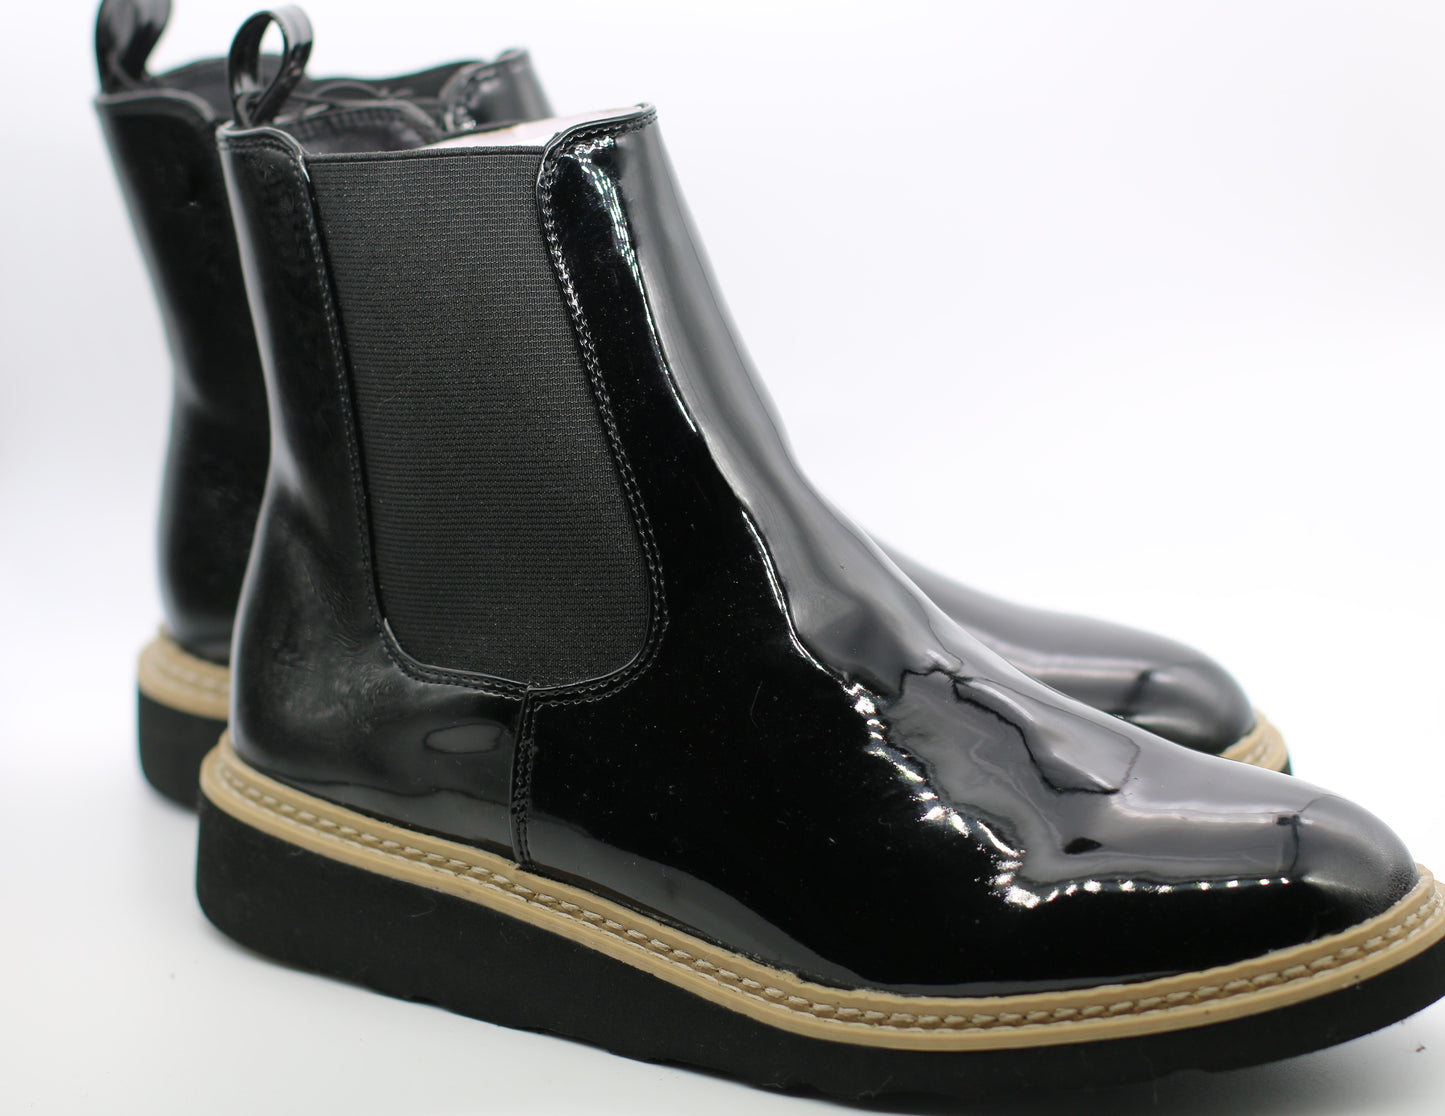 Scoop Cara Chelsea Boots with Lug Sole Women’s